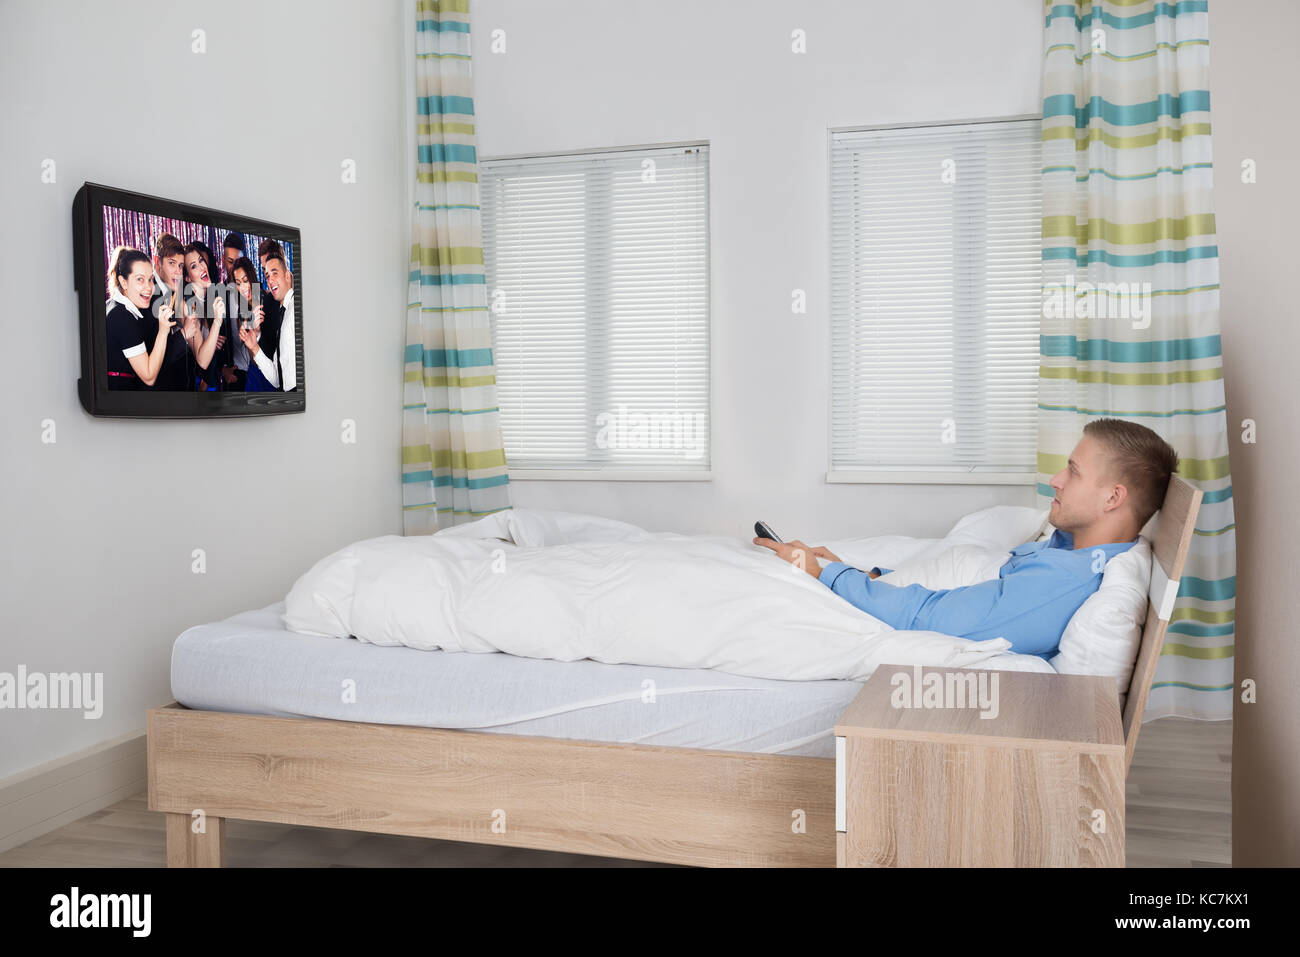 Young Man Leaning On Bed Watching Television Stock Photo